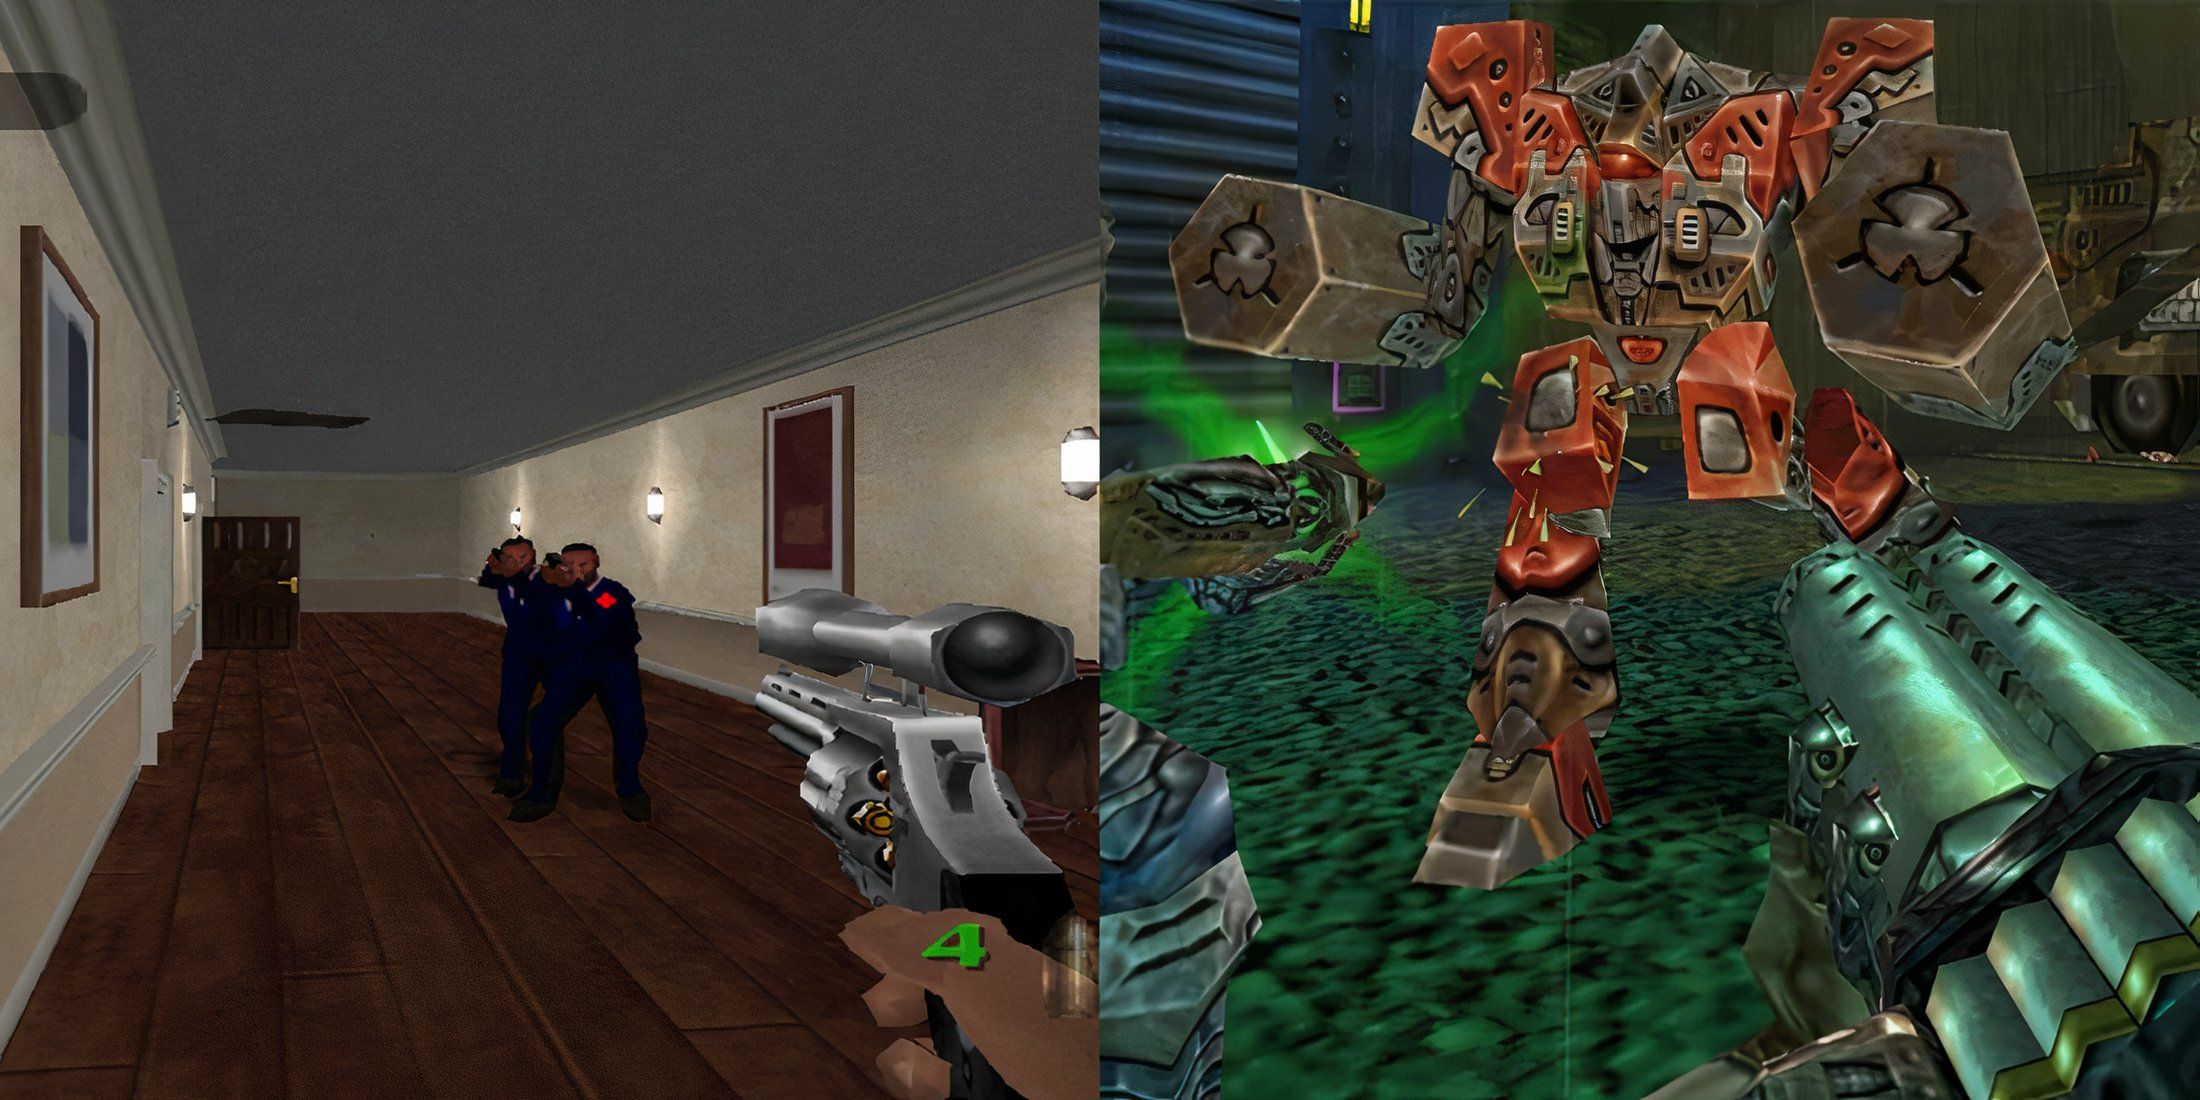 Feature Images for forgotten N64 FPS games